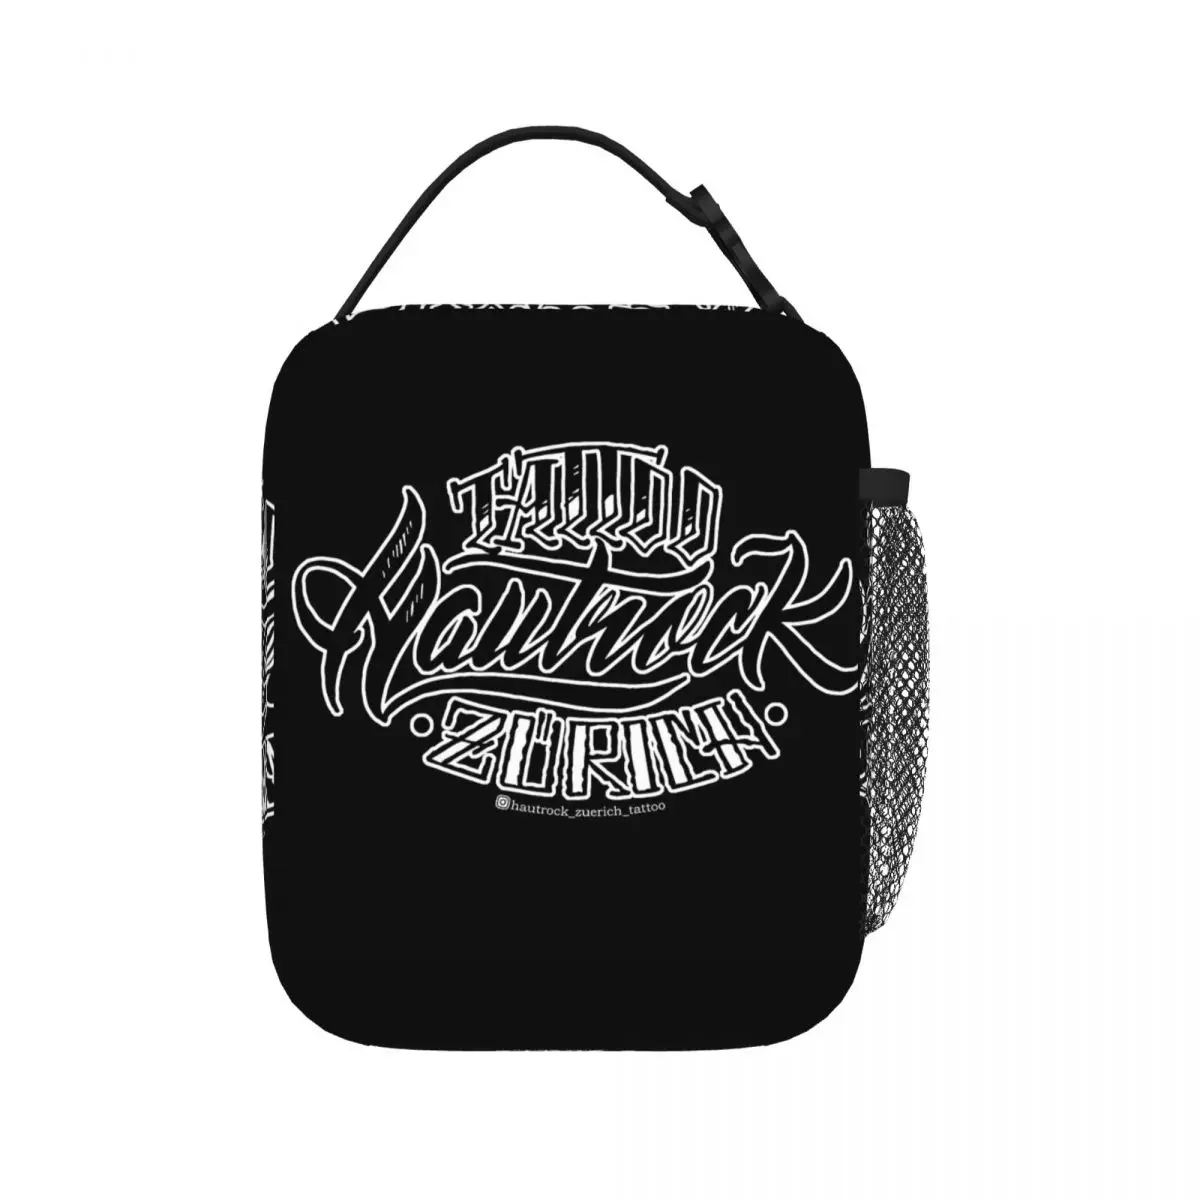 Hautrock, The Logo Brand That Name Insulated Lunch Bag Picnic Bag Thermal Cooler Lunch Box Lunch Tote for Woman Work Kids School